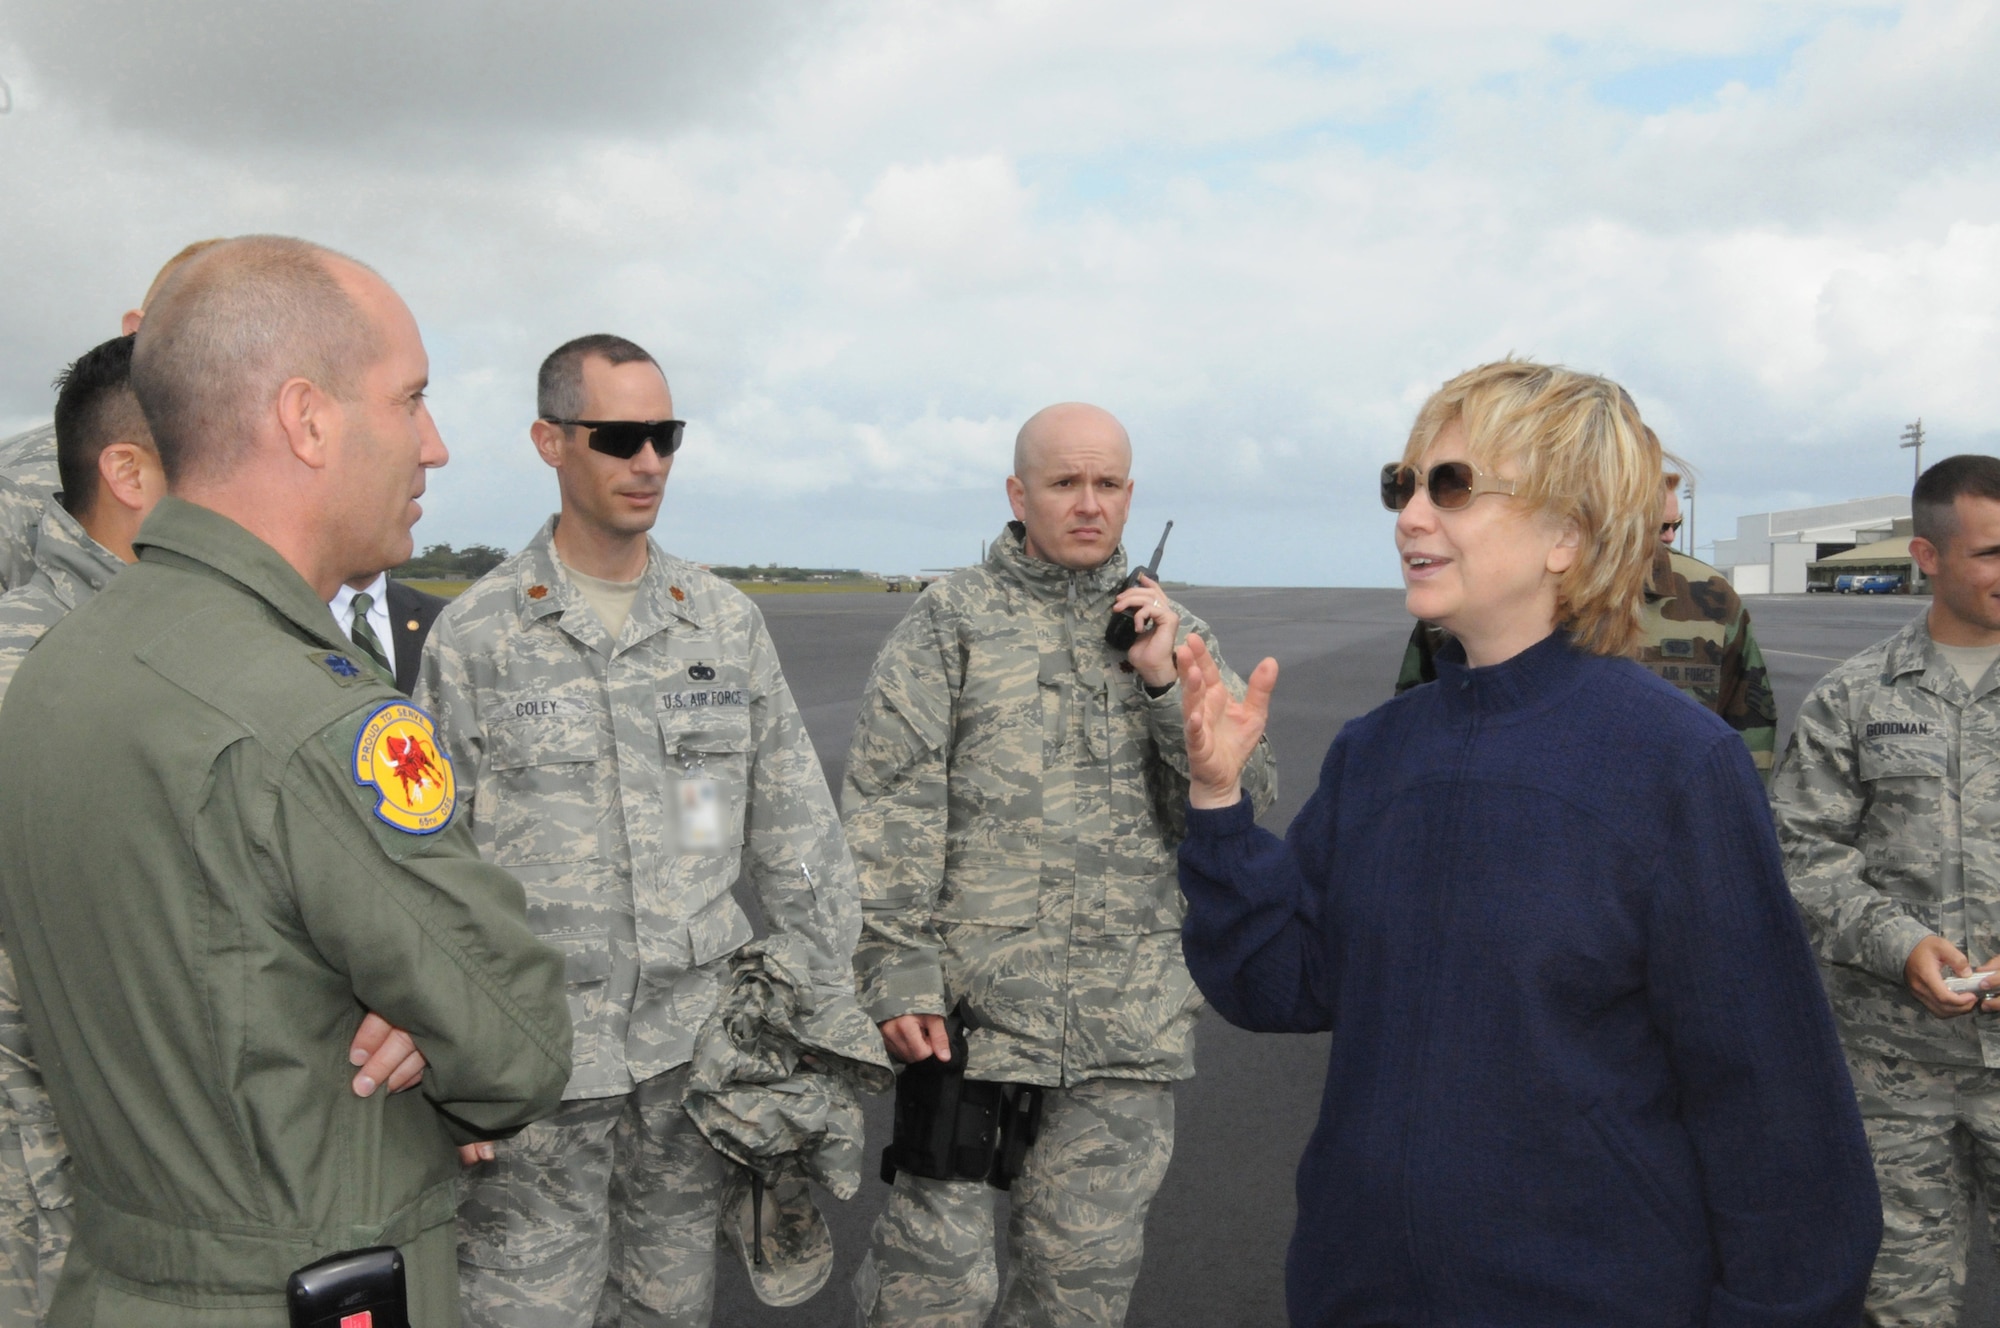 Secretary of State Hillary Rodham Clinton speaks with Lt. Col. Edward Van Gheem, 65th Operations Support Squadron Commander during a stop at Lajes Field, Azores, Portugal on June 3.  Secretary Clinton stopped here en route to Cairo, Egypt to join President Barack Obama for his speech, and participate in the President's meeting with President Hosni Mubarak.  (U.S. Air Force photo by Tech Sgt. Rebecca F. Corey))